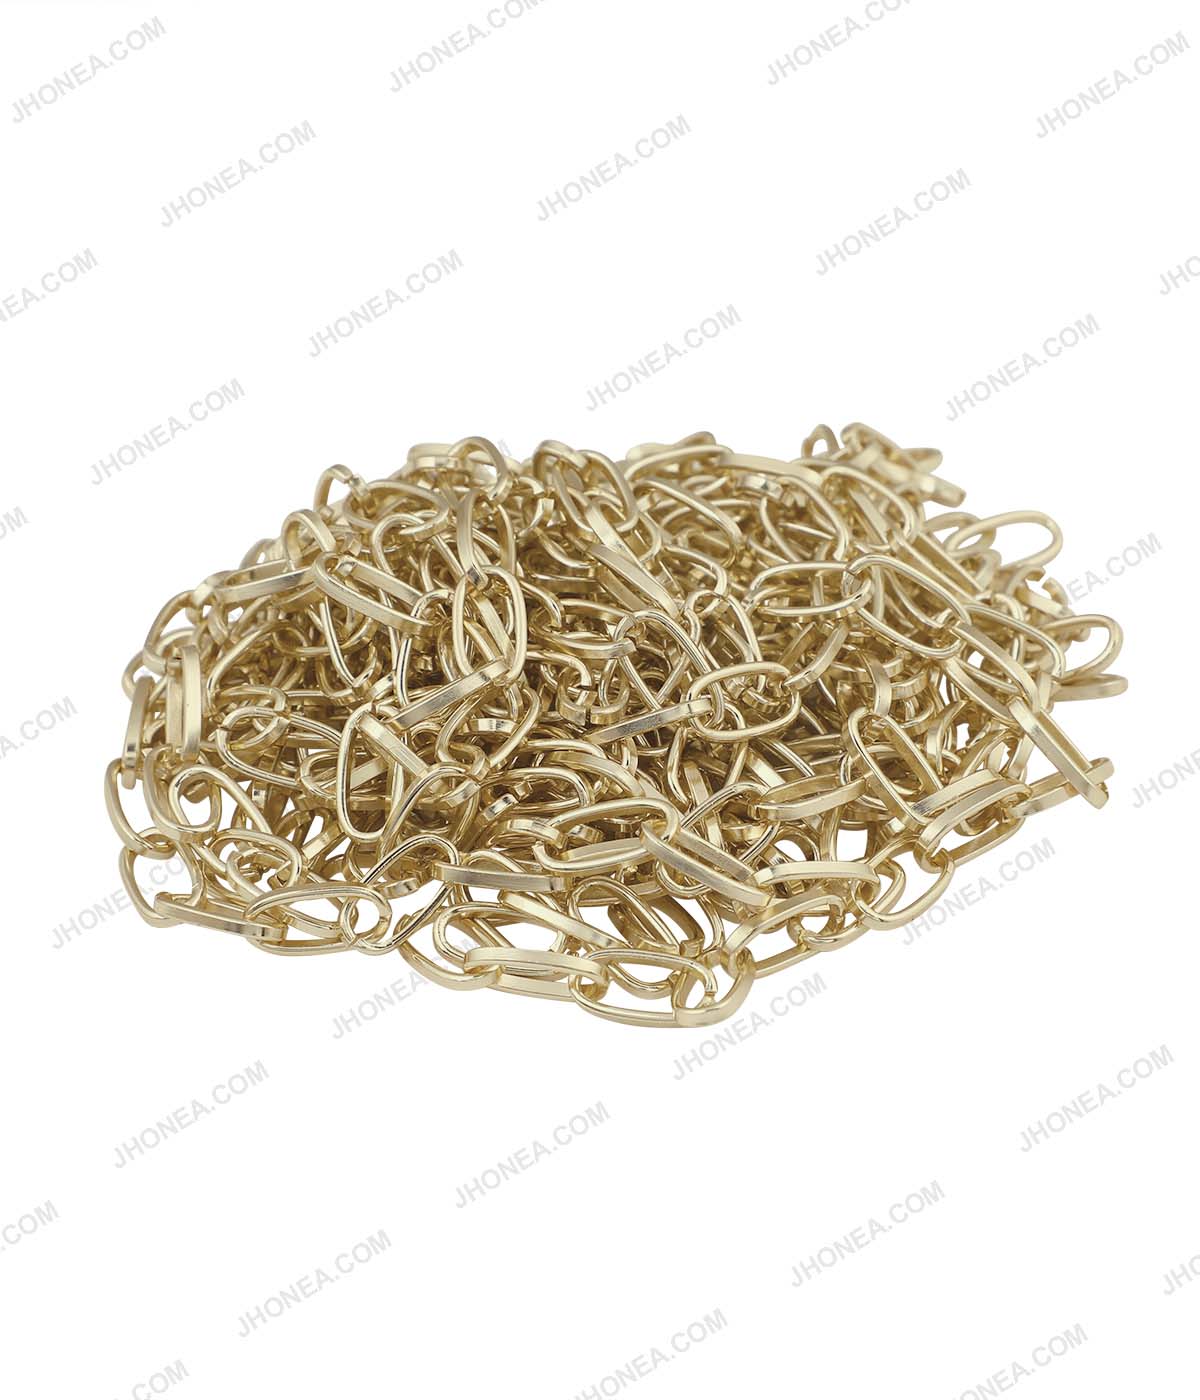 Shiny Gold Oval Shape Elongated Cable Link Chain Lace